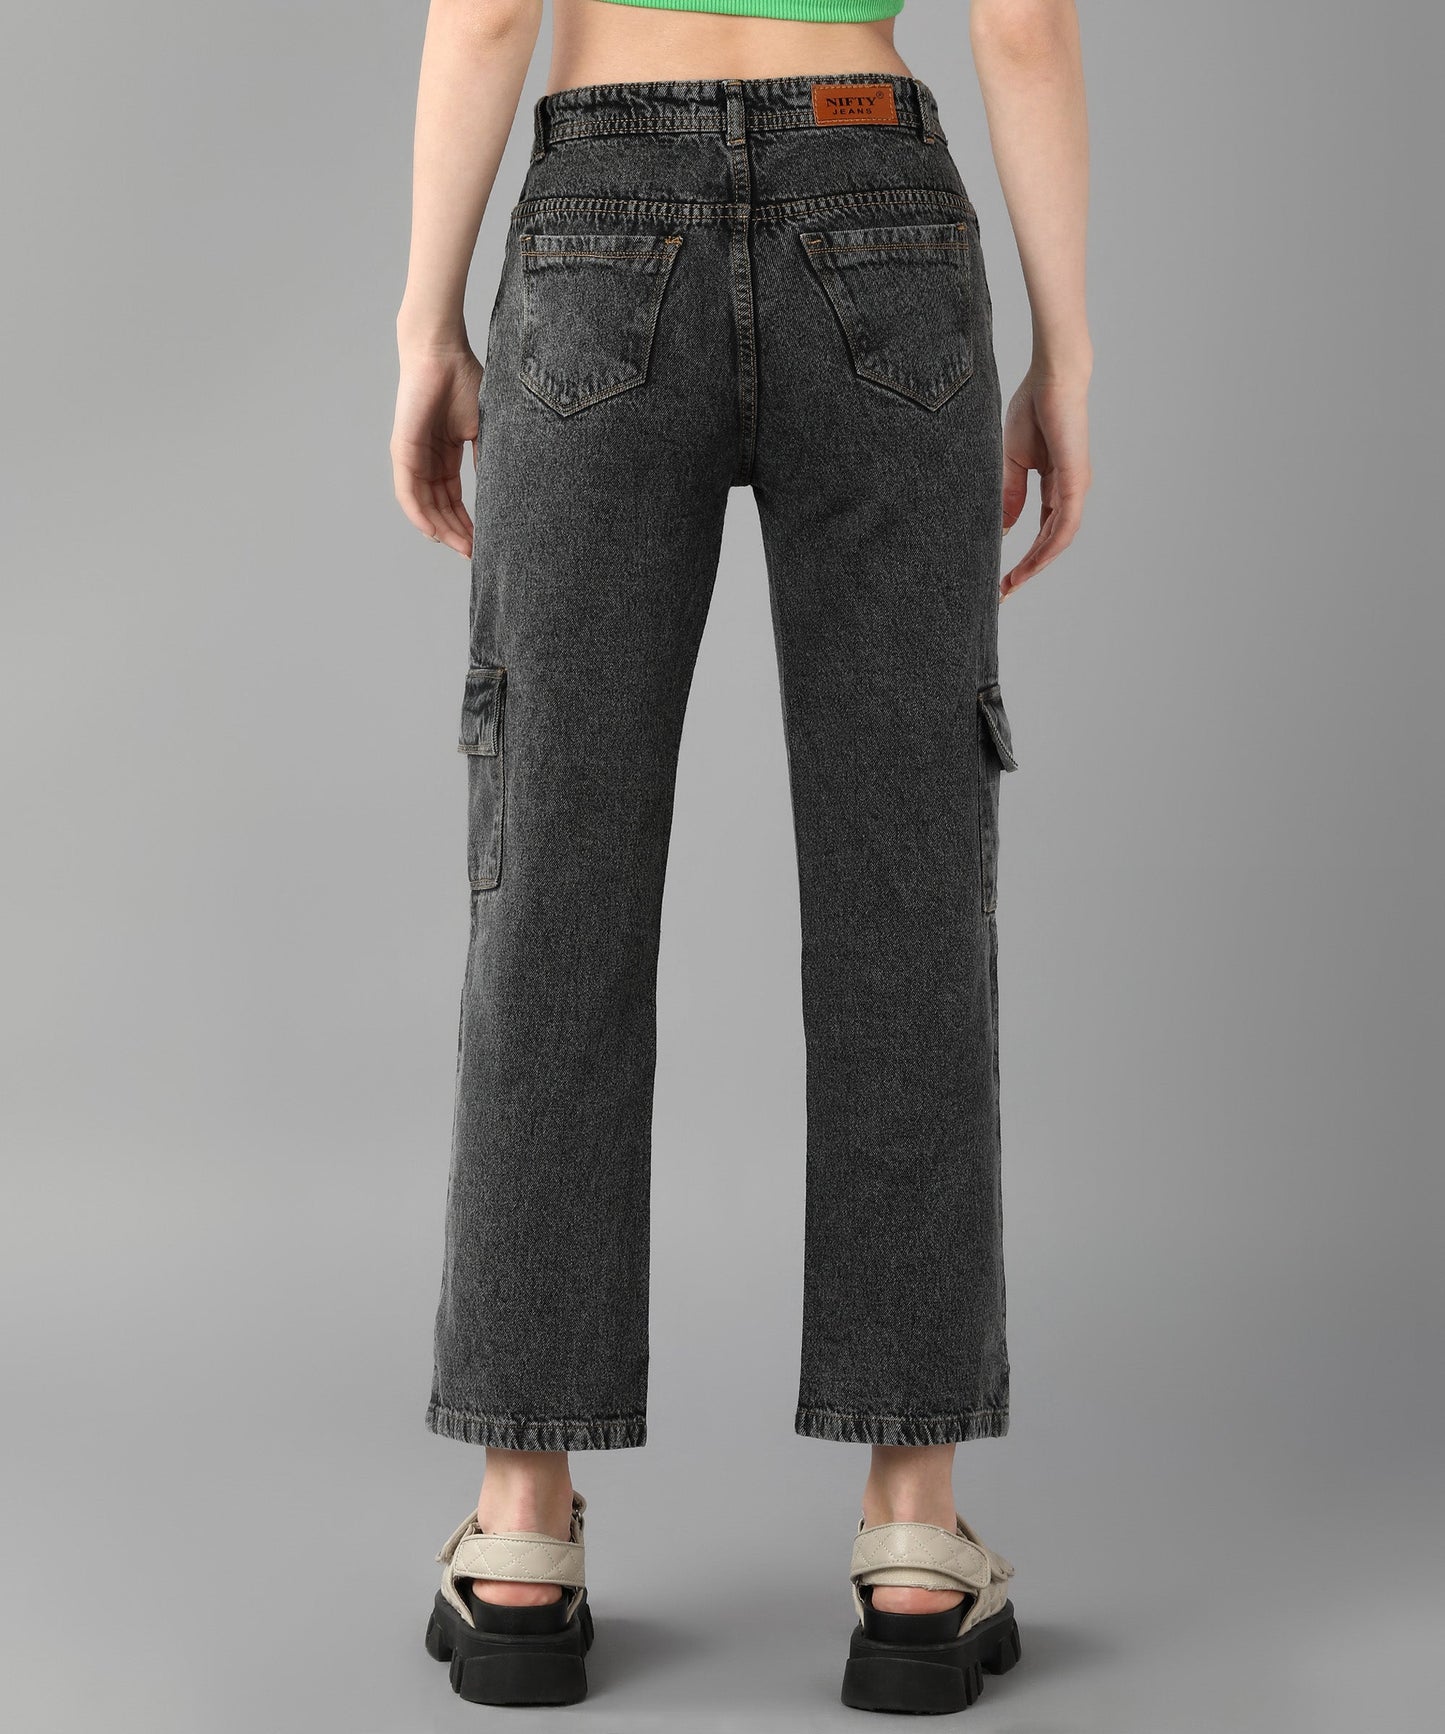 Relaxed Fit Cargo Grey Jeans - NiftyJeans